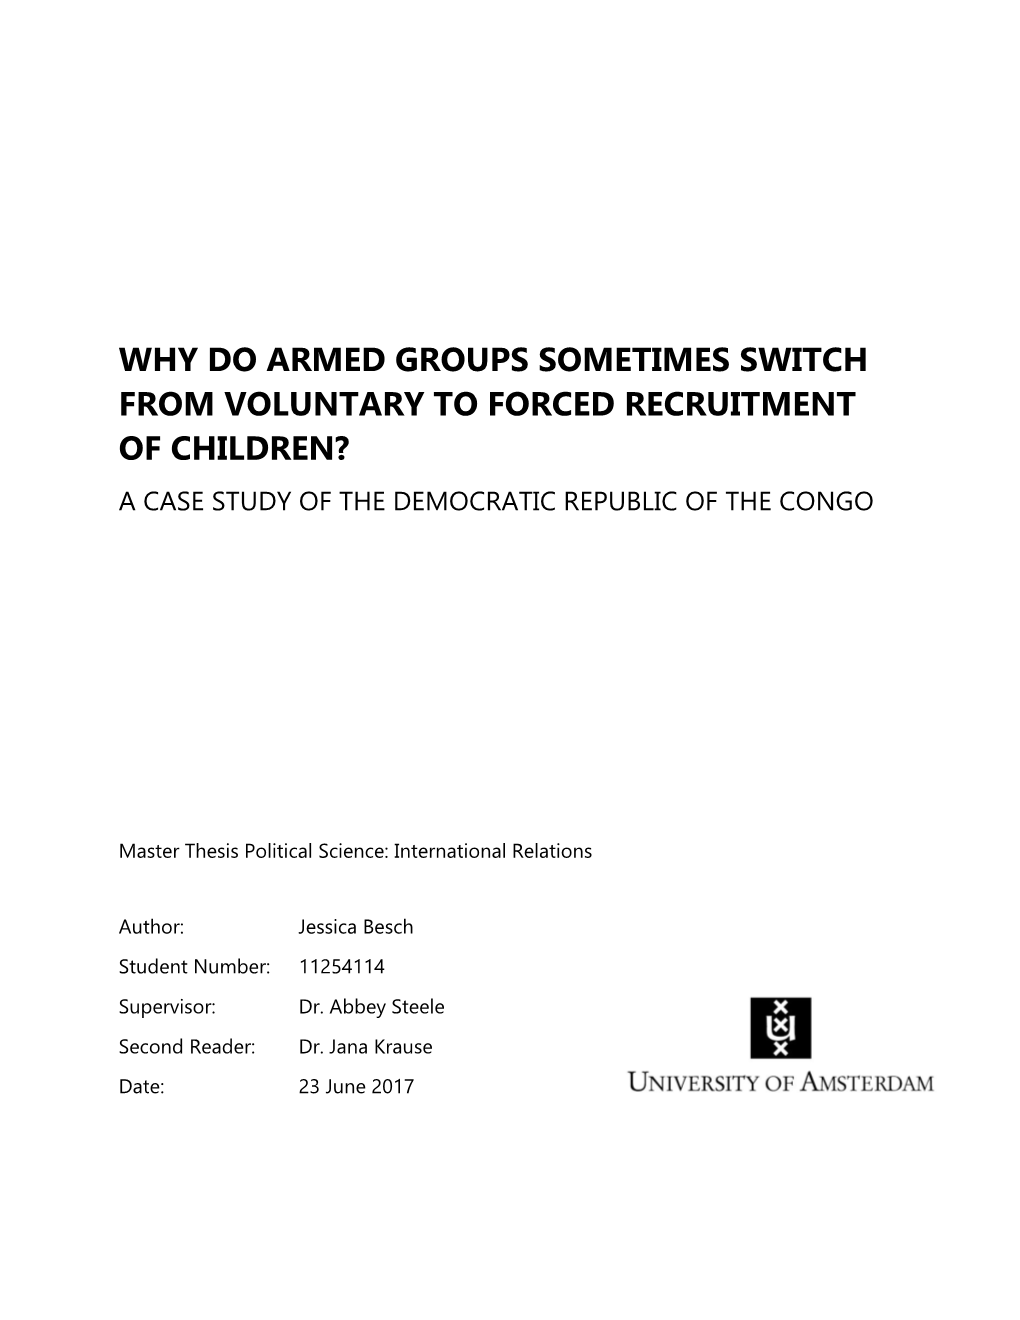 Why Do Armed Groups Sometimes Switch from Voluntary to Forced Recruitment of Children? a Case Study of the Democratic Republic of the Congo